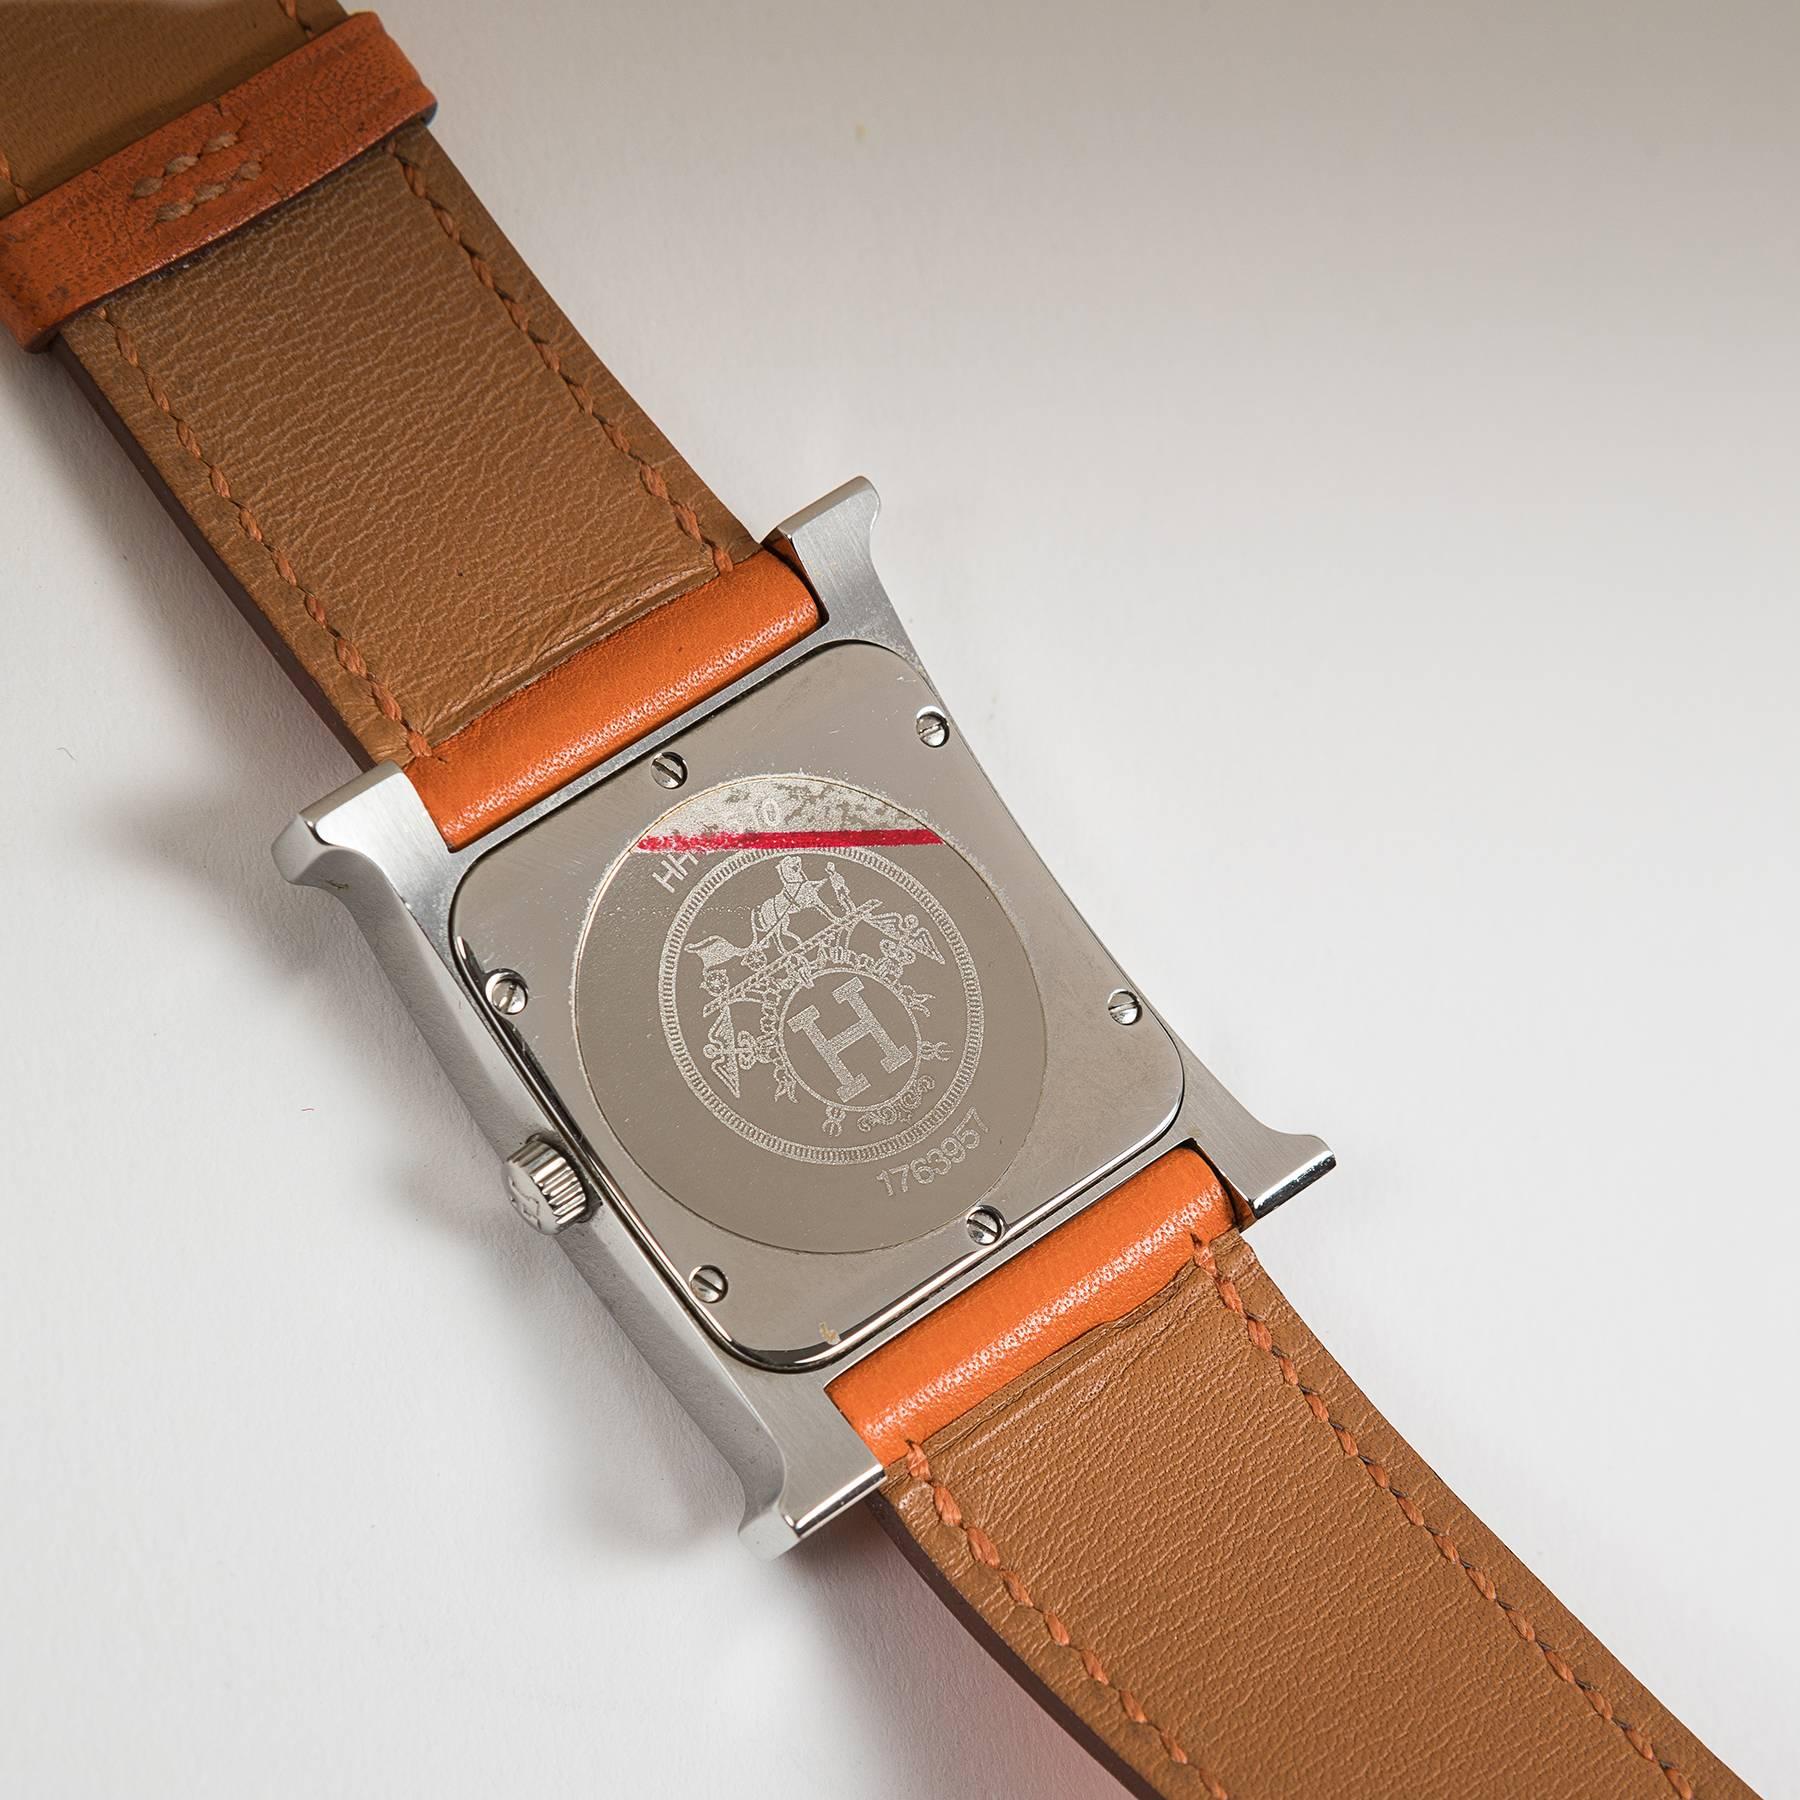 Women's or Men's 2002 Hermes Heure H Wrist Watch Silver Colour and Orange Leather Wristband 